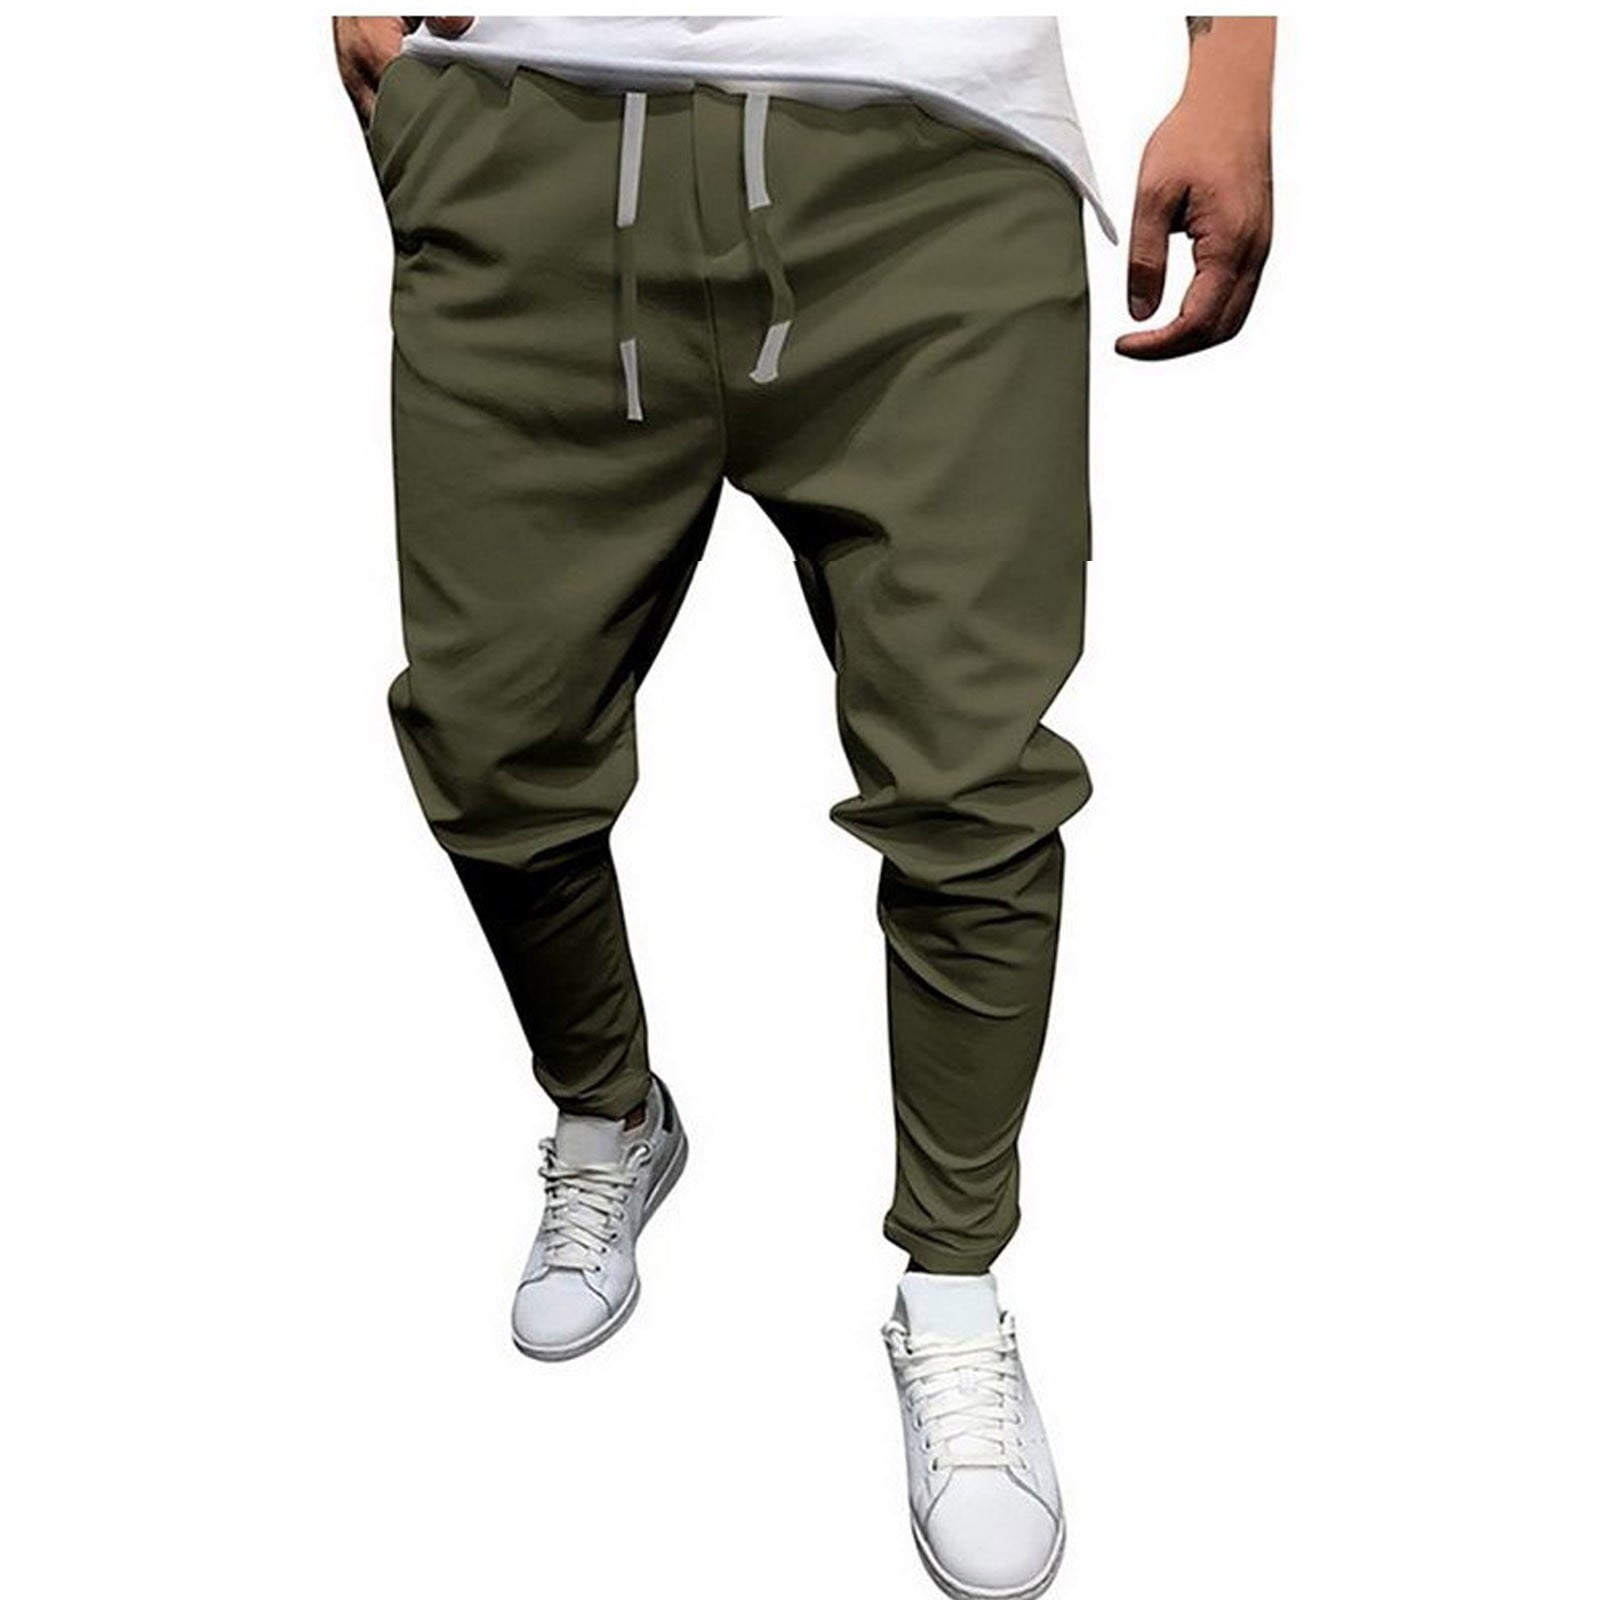 Entyinea Stretch Pants for Men Casual Slim Fit Joggers Sweatpants for ...